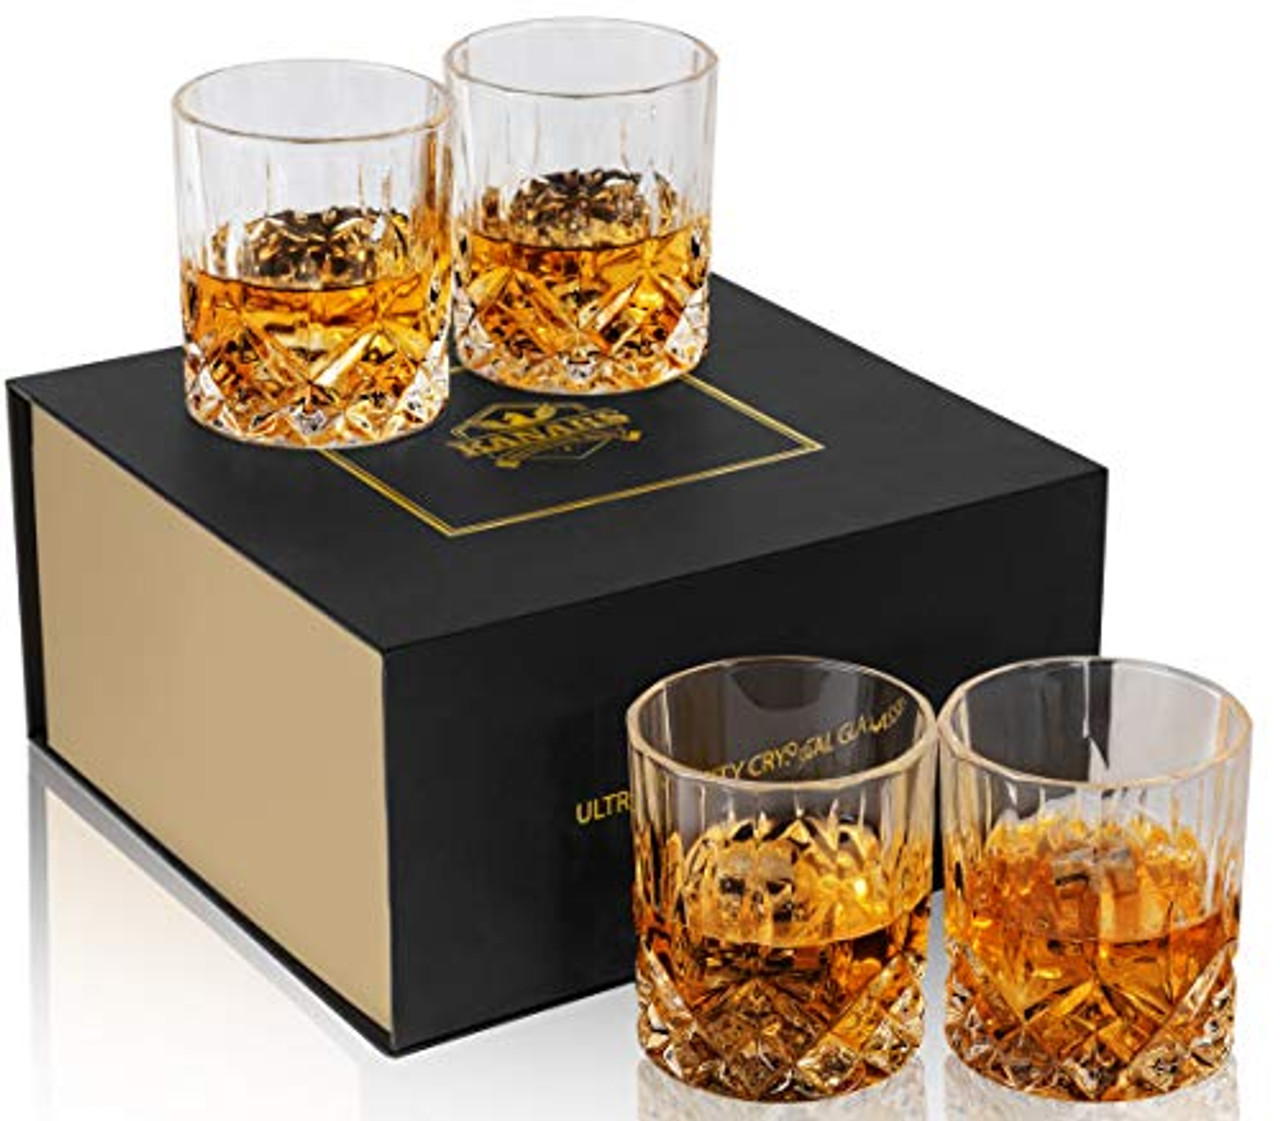 Old Fashioned Whiskey Glasses with Luxury Box - 10 Oz Rocks Barware For  Scotch, Bourbon, Liquor and Cocktail Drinks - Set of 4